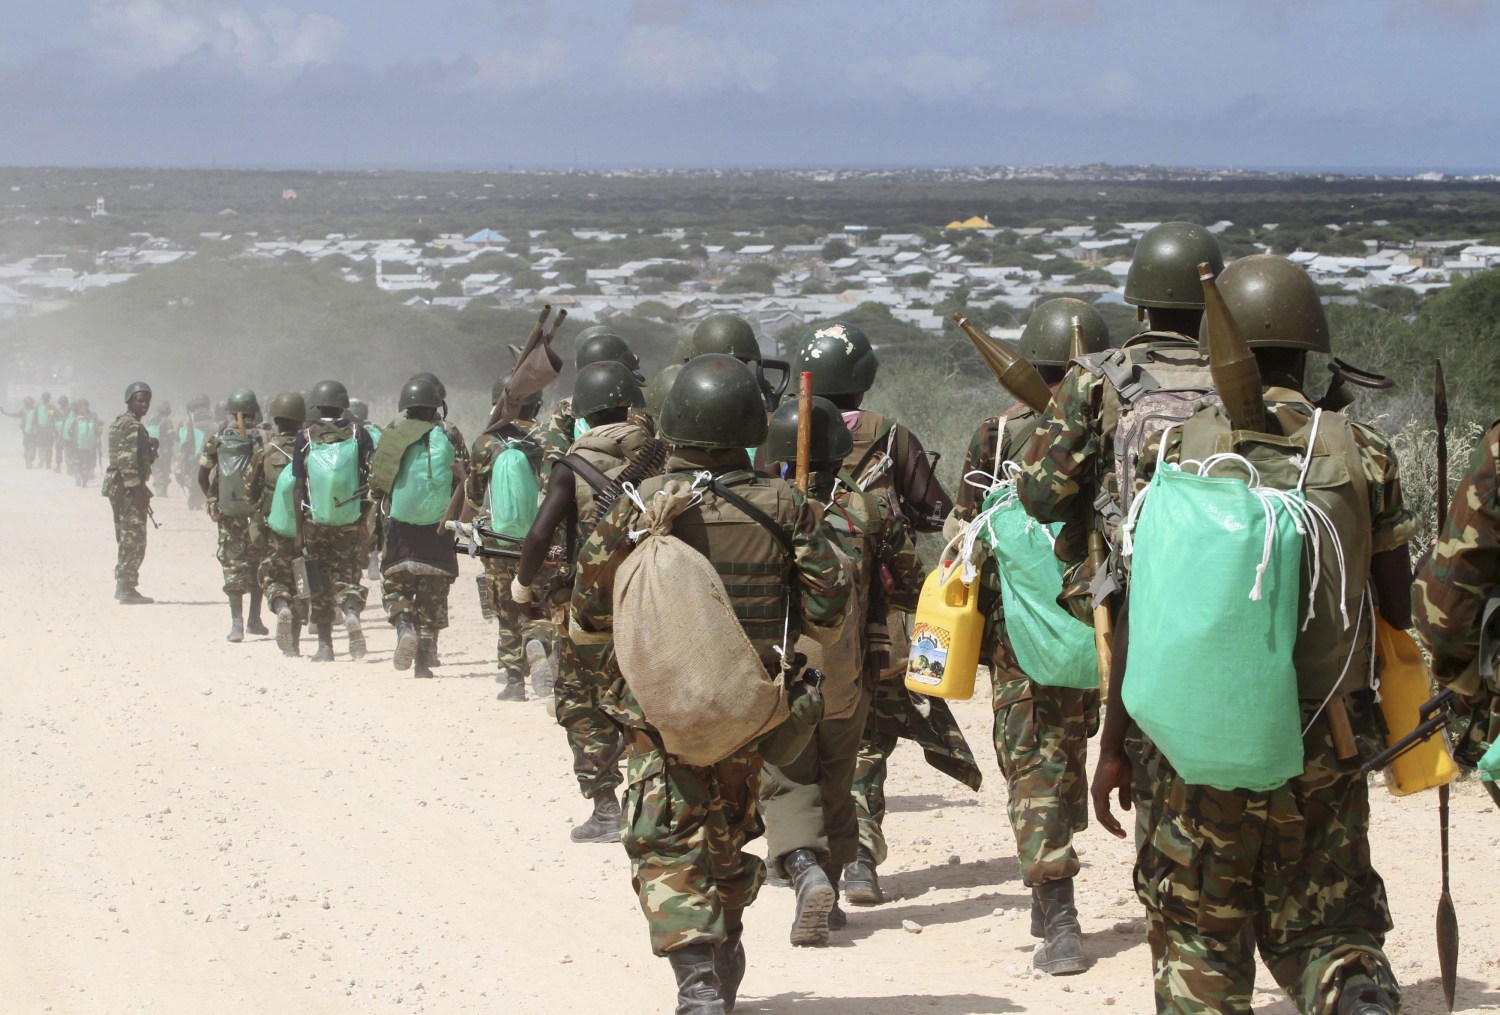 Picture of African Union Mission in Somalia peacekeepers and a refugee camp.